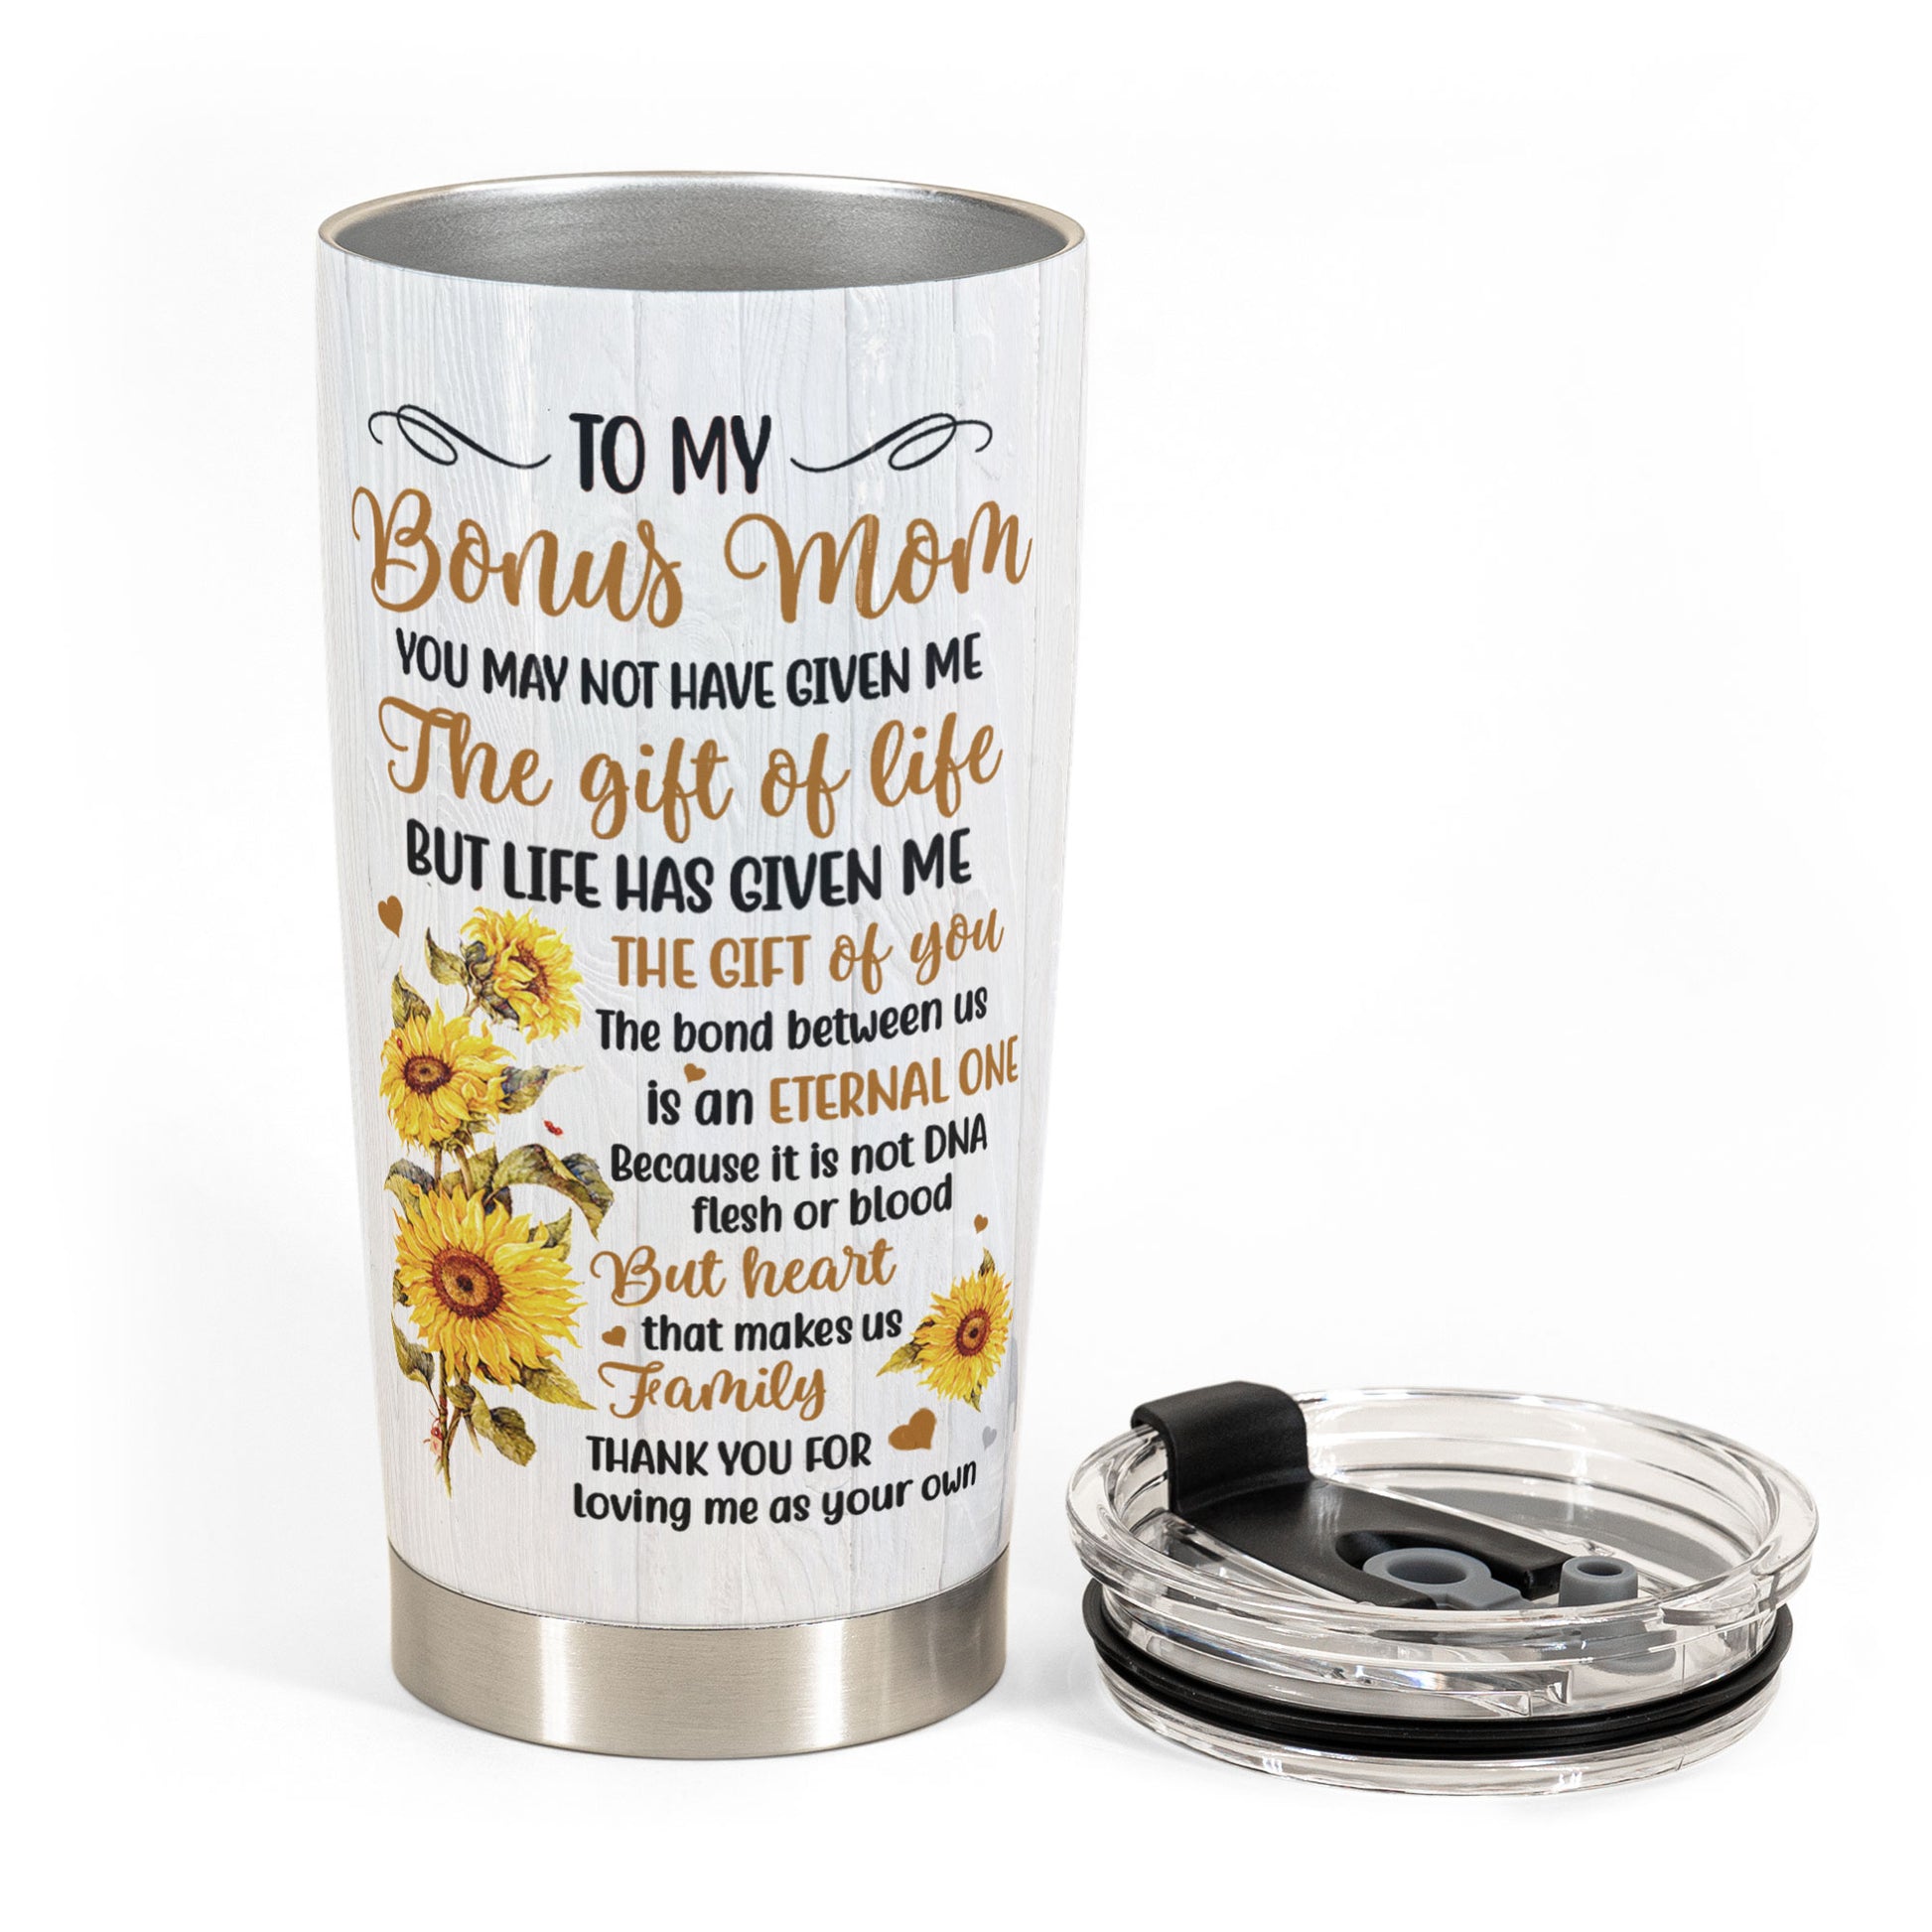 Personalized Mom Gifts From Daughter, To My Mom 20oz Stainless Steel  Tumbler, Sunflower Mom Cup, Mothers Day Gifts For Mom, New Mom, Bonus Mom